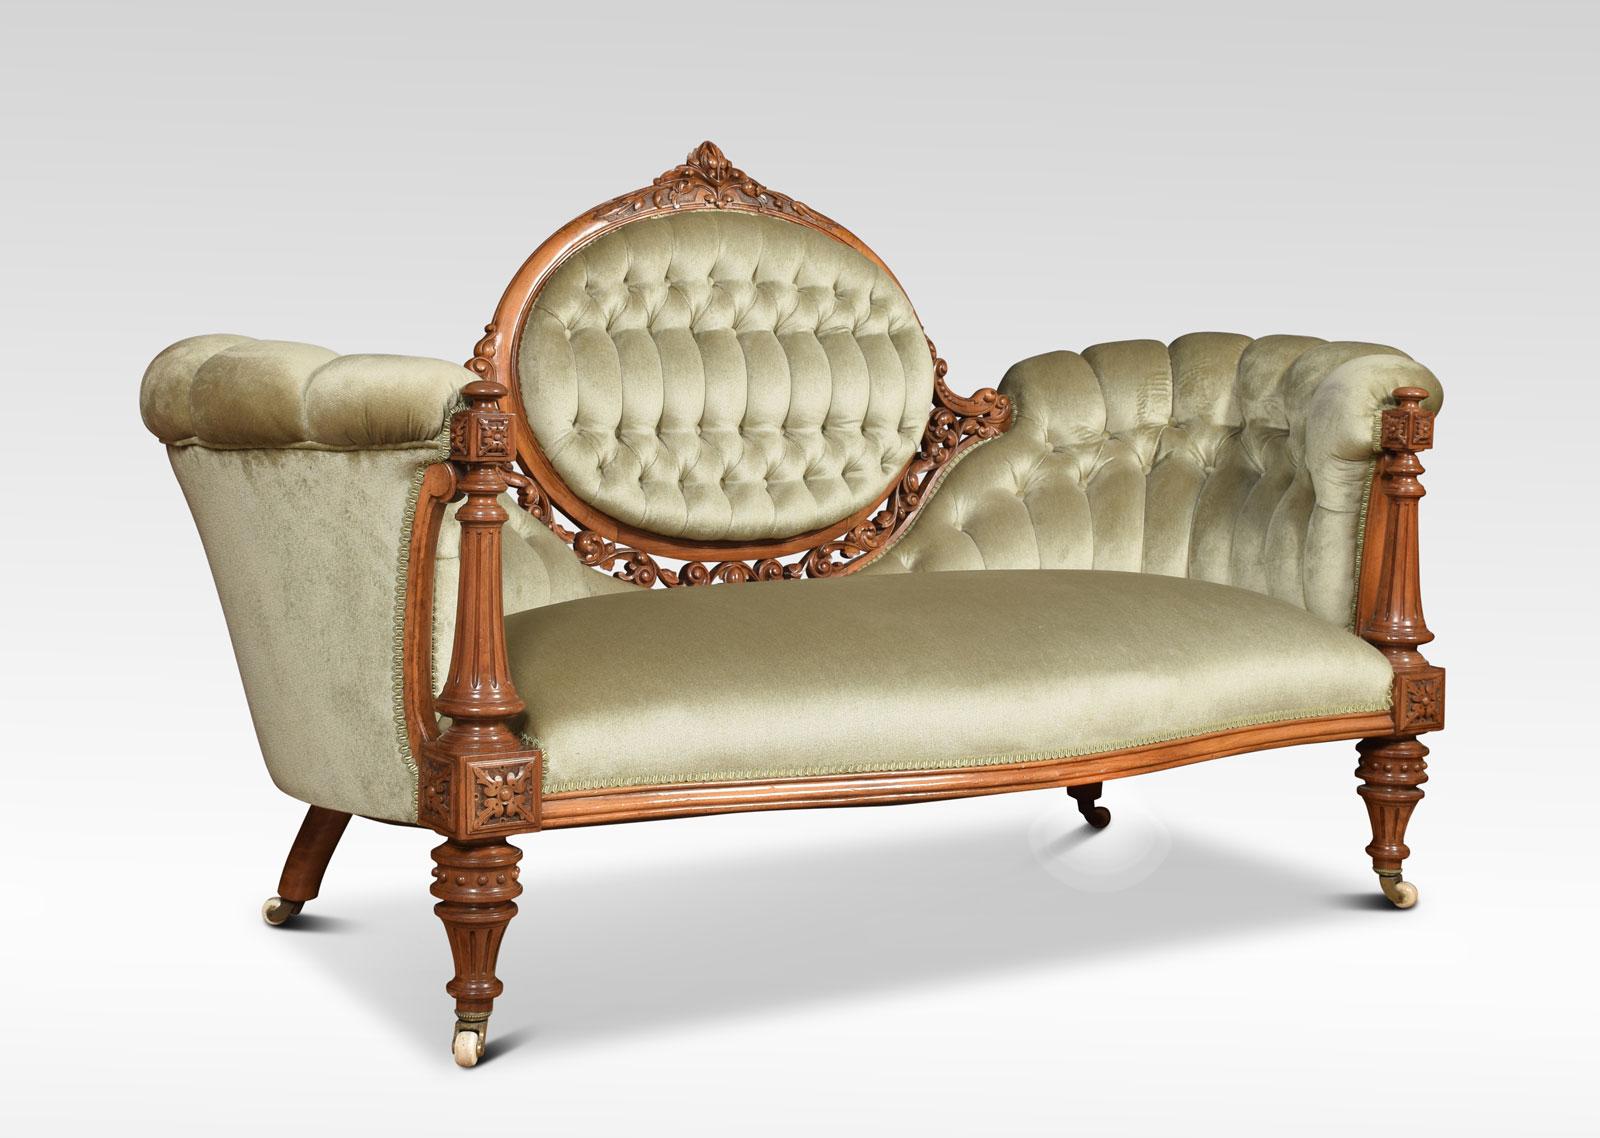 Carved walnut cameo back settee the show framed back, with deep buttoned velvet upholstery. To the shaped arms above turned fluted front supports terminating in brass ceramic castors.
Dimensions
Height 40.5 inches height to seat 18.5 inches
Length